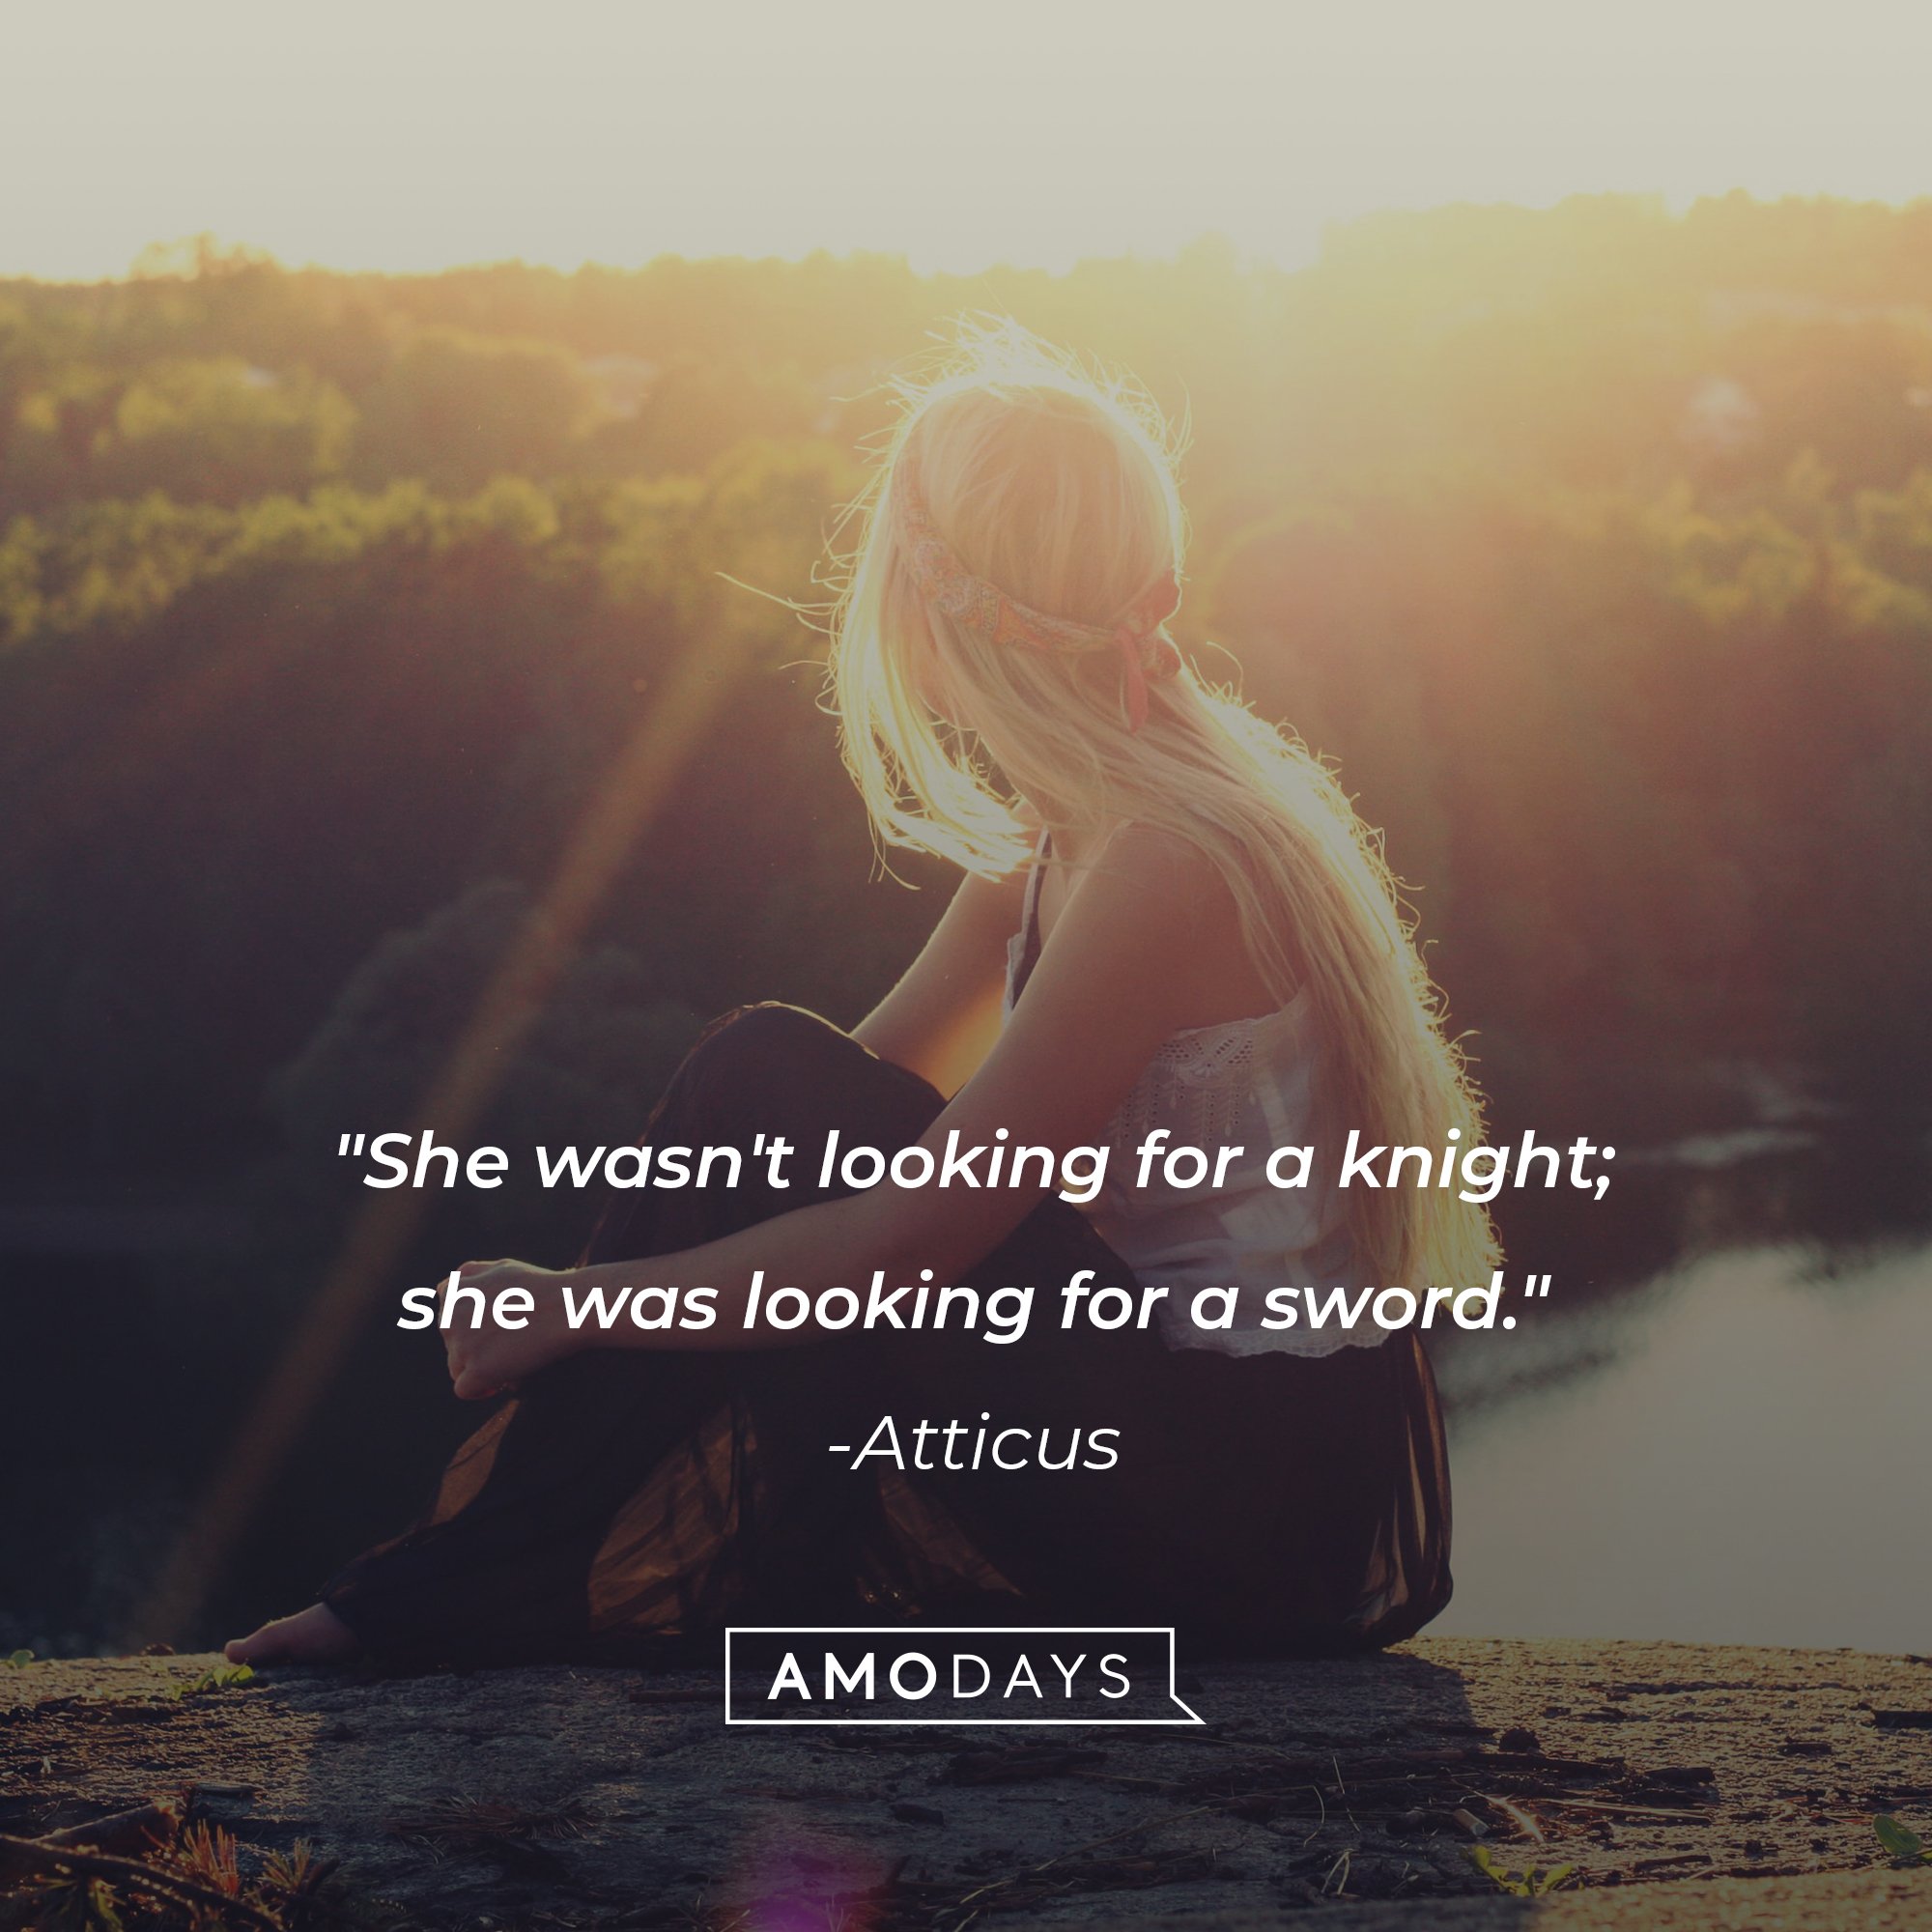 Atticus’ quote: "She wasn't looking for a knight; she was looking for a sword." | Image: AmoDays